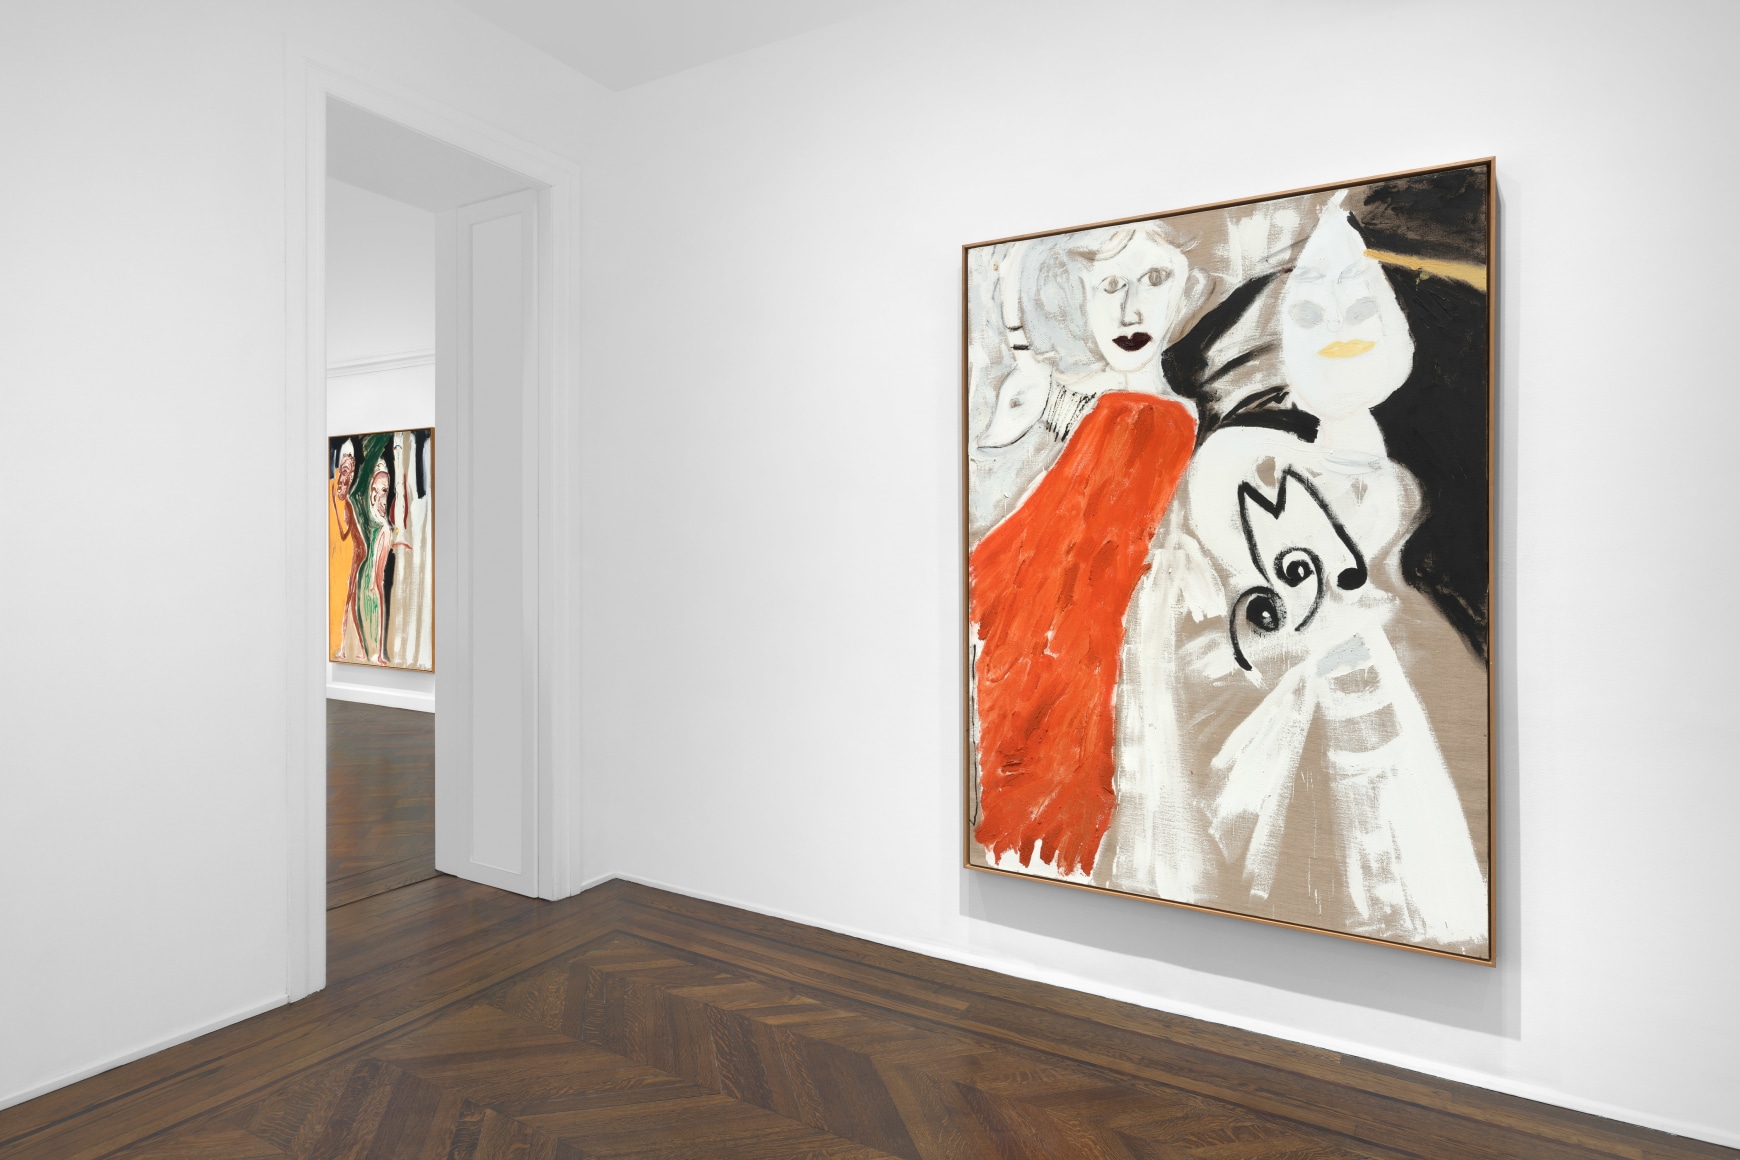 Don Van Vliet, Parapliers the Willow Dipped, Paintings 1967-1997, New York, 2020, Installation Image 12